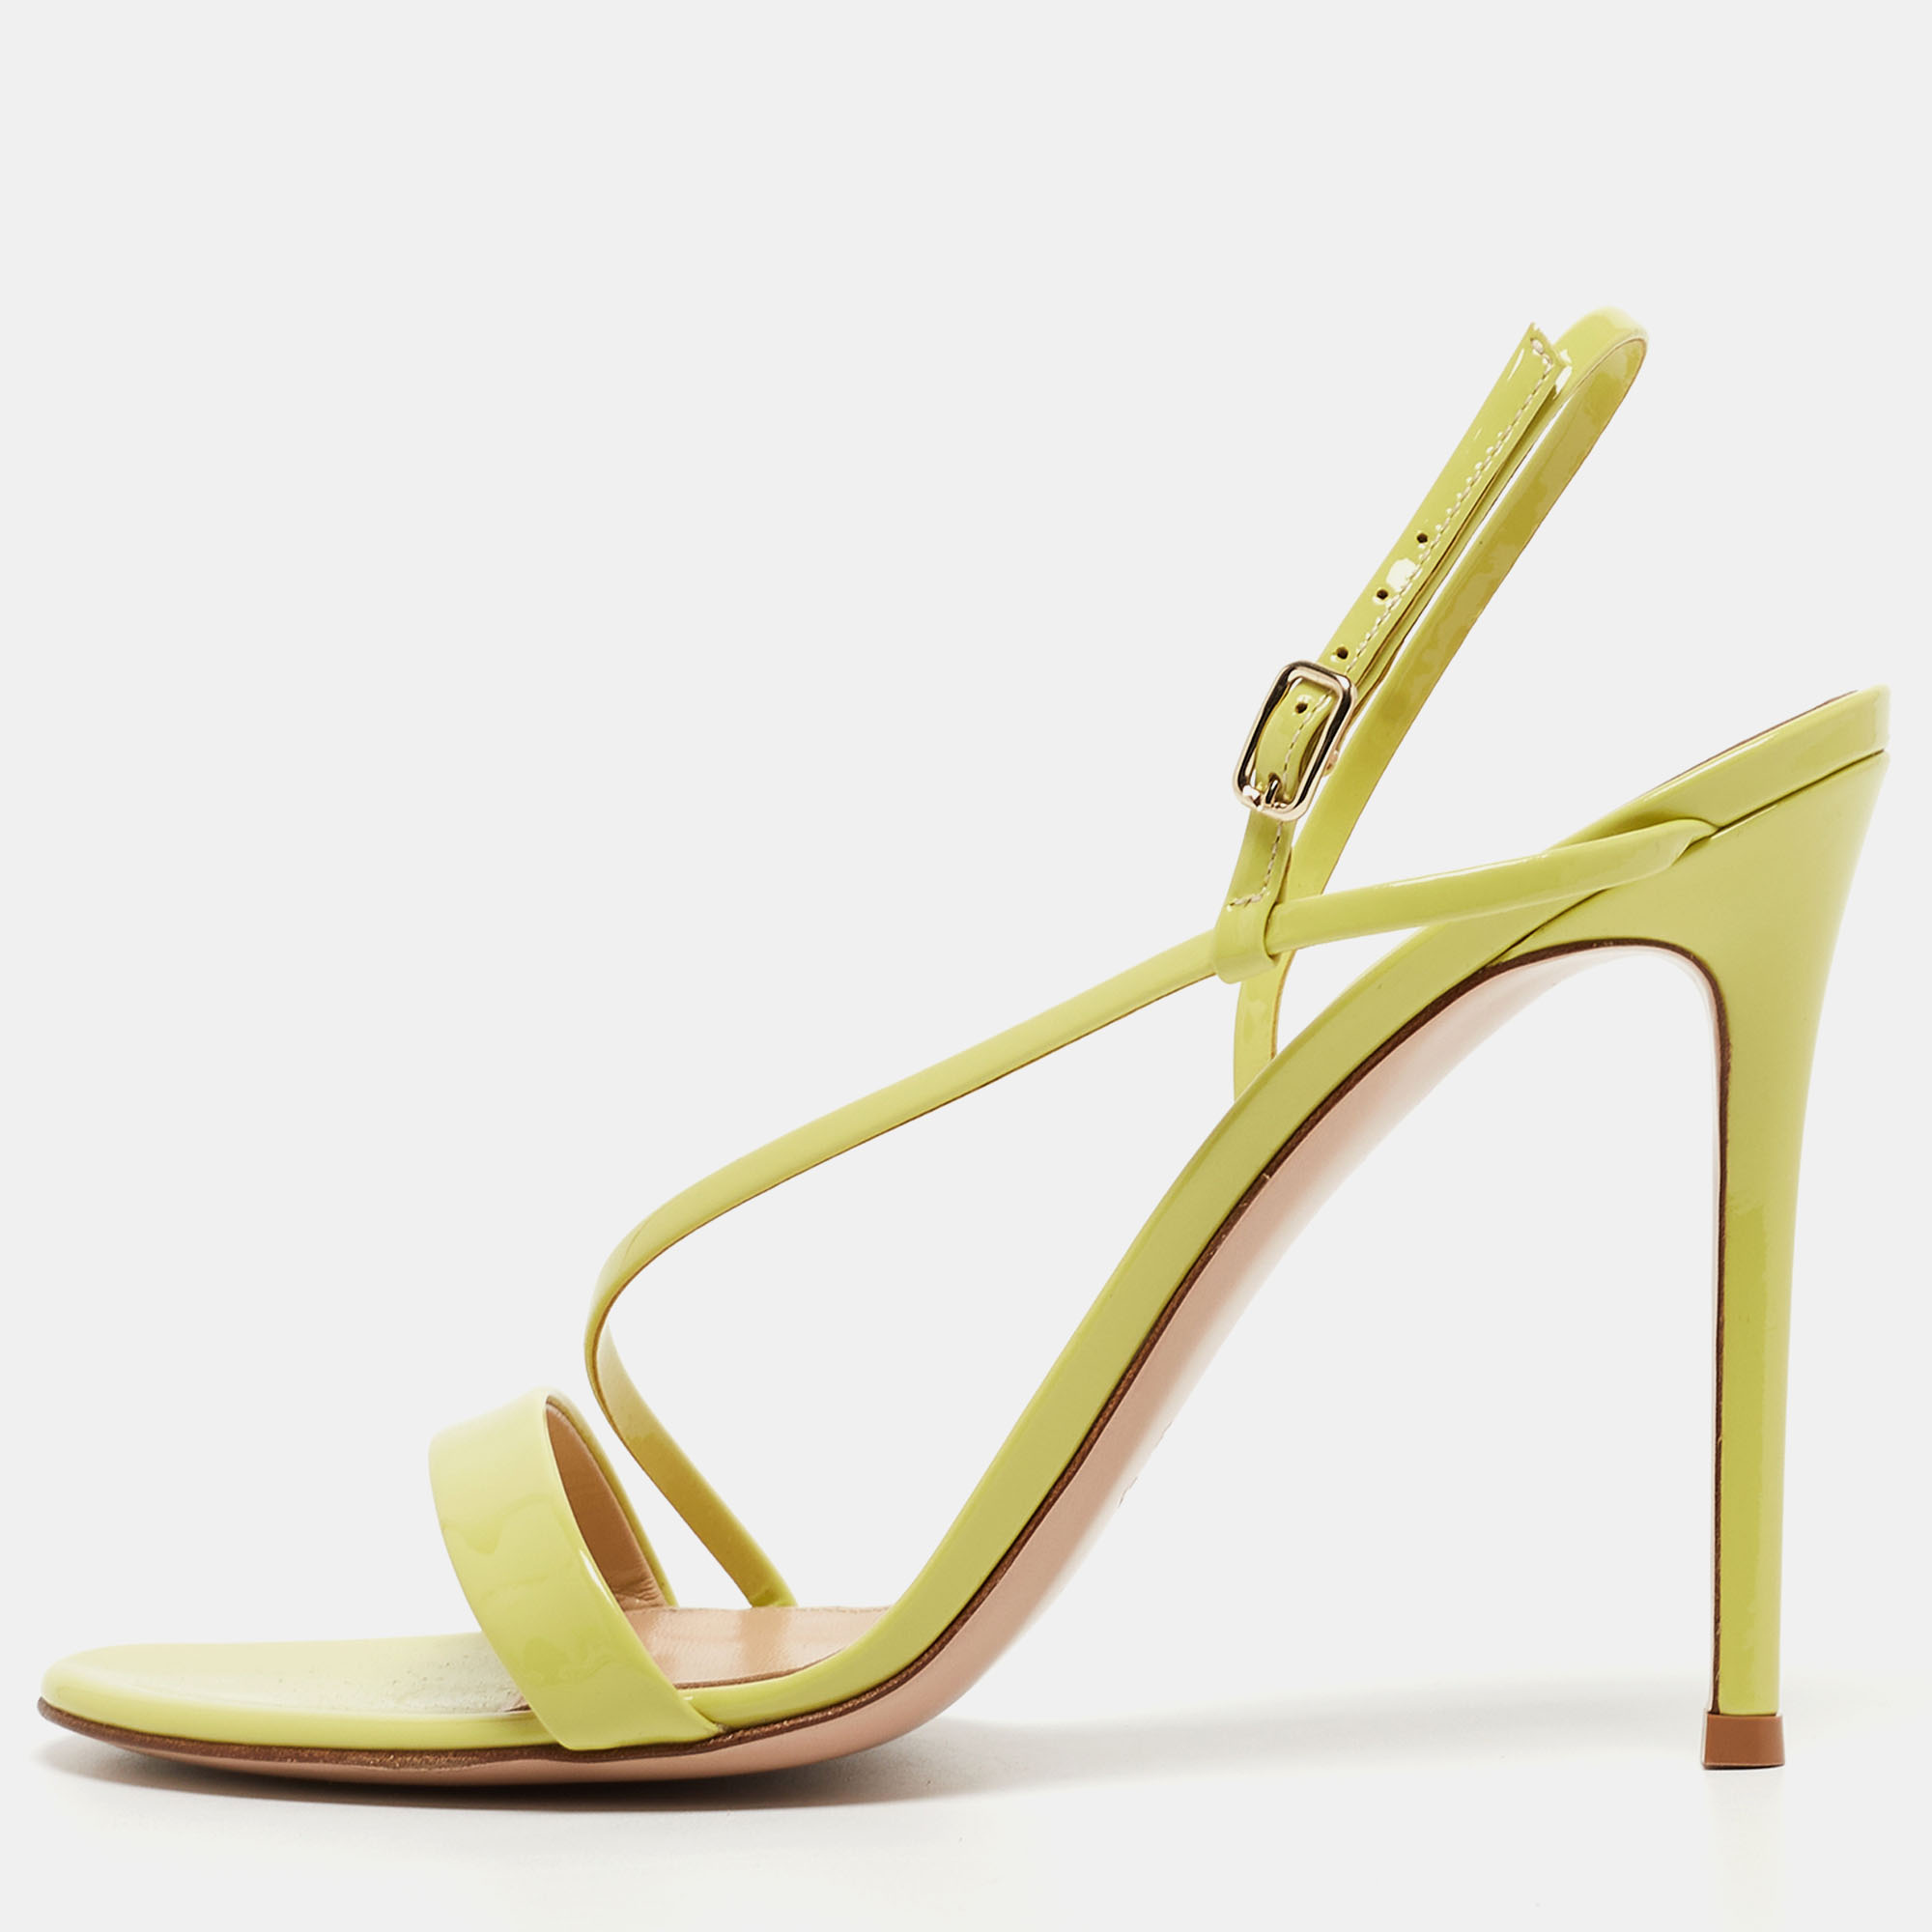 Pre-owned Gianvito Rossi Light Green Patent Leather Manhattan Sandals Size 40